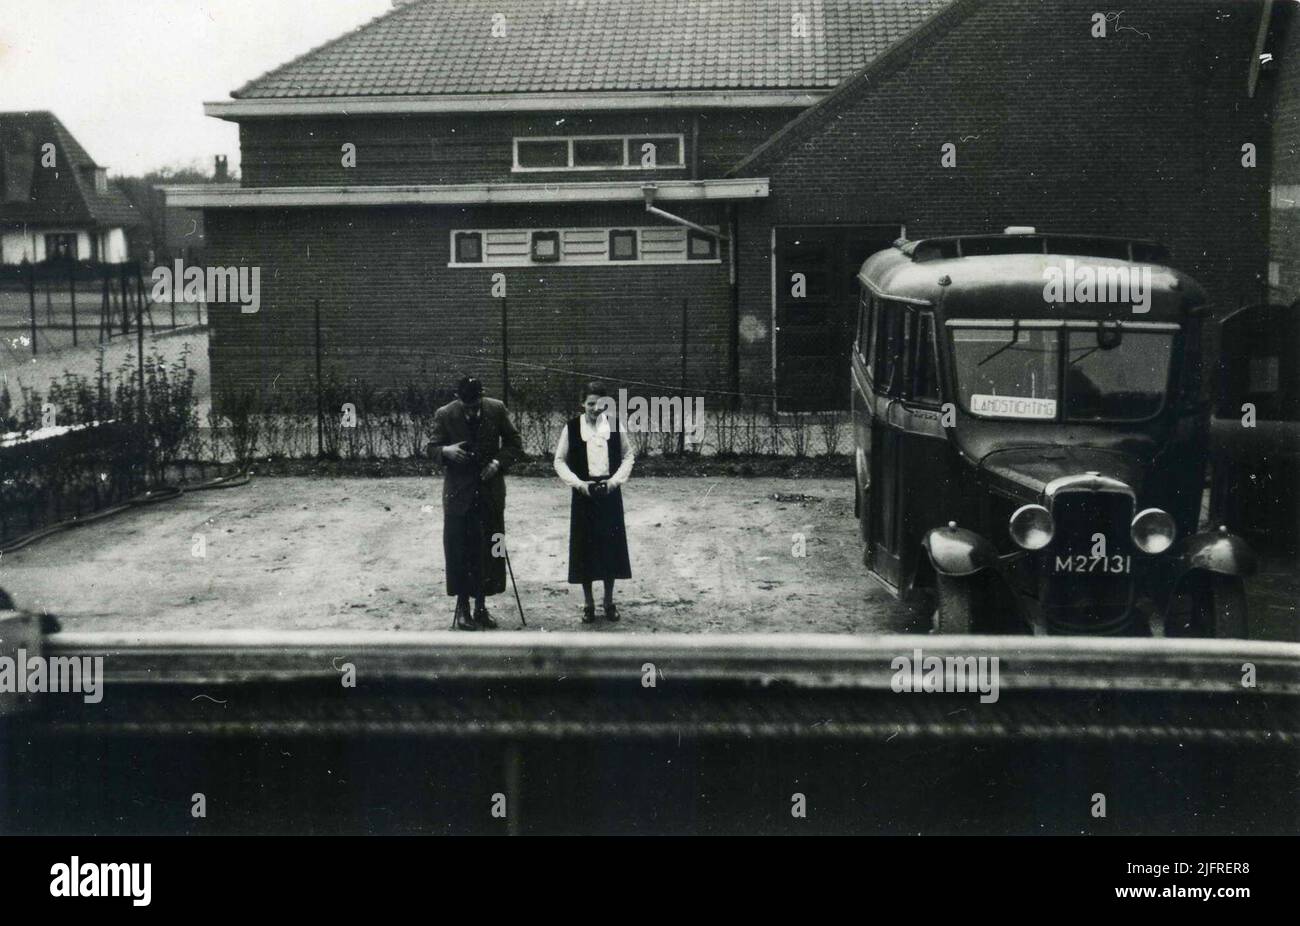 Back of the grocery store and garage of autobus service and taxi company 'Brakkenstein' from entrepreneur/operator Rudolf (Rudolph) Groos (10/08/1881 - 21/11/1944) with one of the buses for passenger transport on the route (Hatert) - Brakkenstein-saint National Foundation-Nijmegen and, in the middle, son Wim and daughter Truus. In the background the Father Eijmardschool, left behind Villa 'Mariahof' '. As of April 1, 1938, the concession and operation of the bus service, started in 1924, were taken over by the Maas-Buurtspoorweg Maatschappij (MBS) Stock Photo